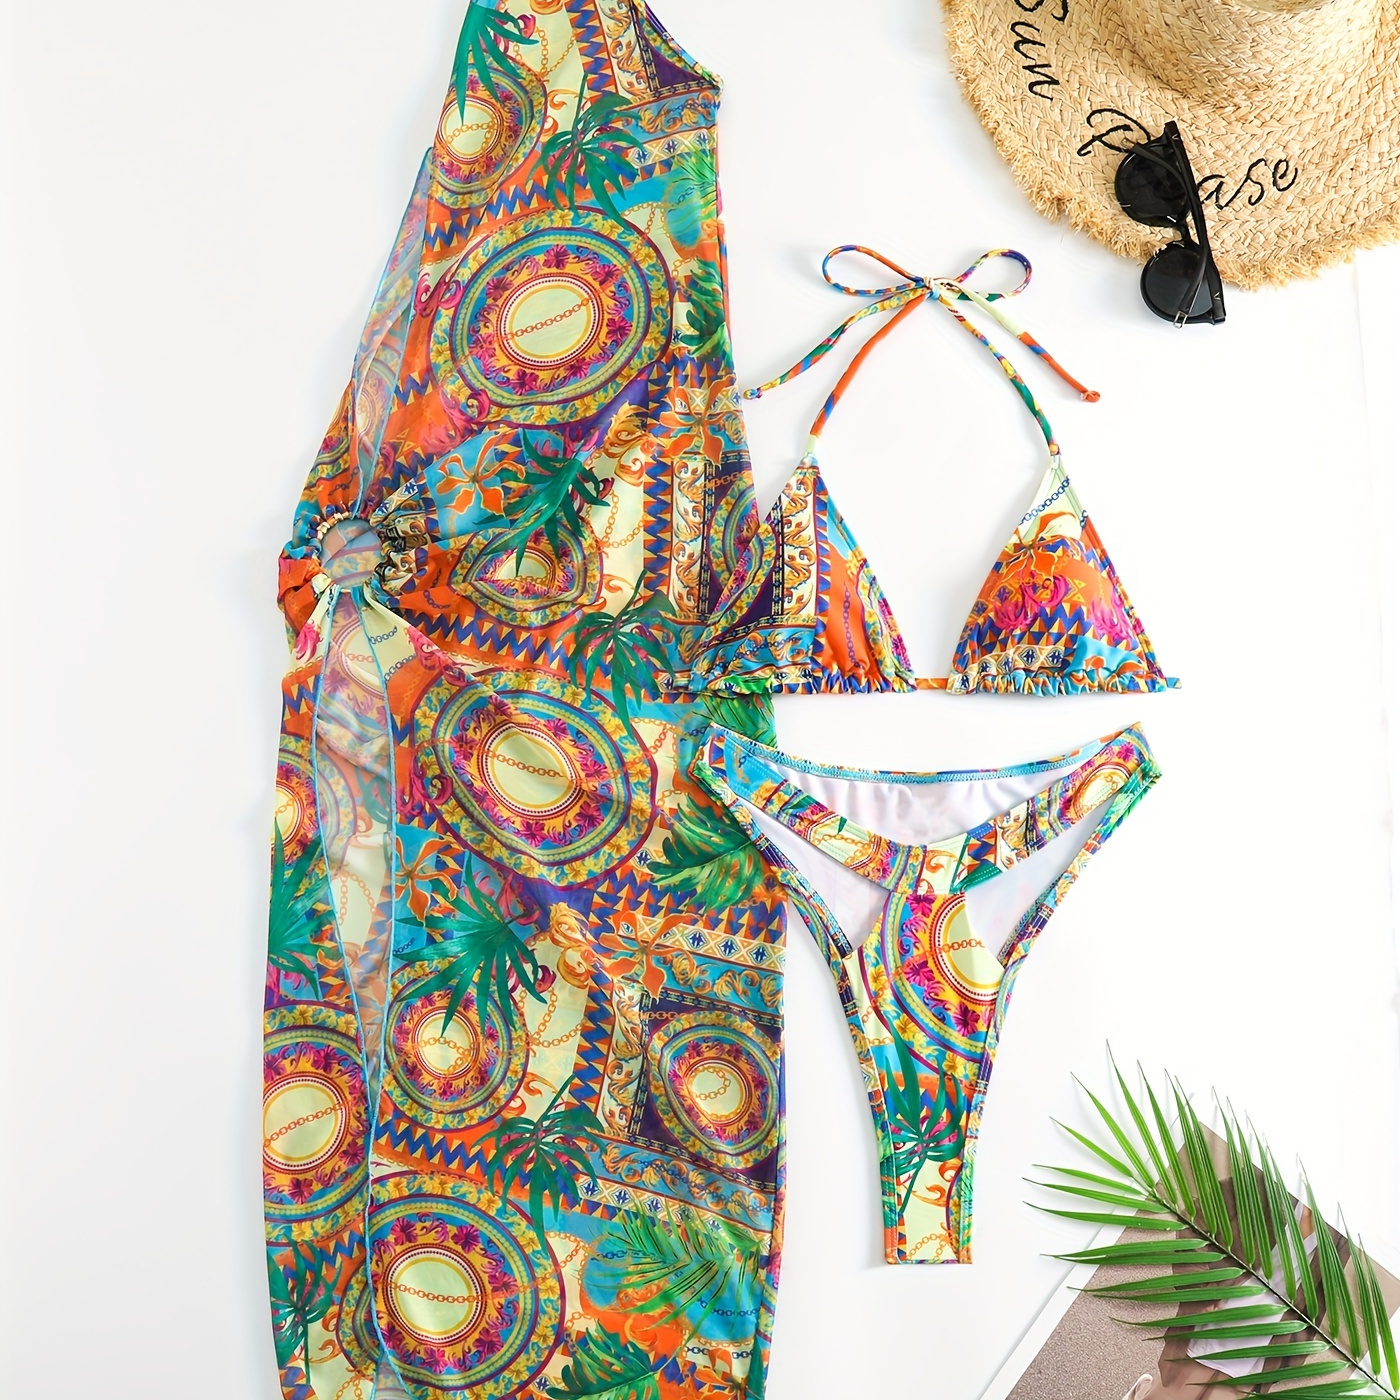 

3-pieces Tropical Print Bikini Sets, Halter V Neck High Cut With Ring-linked Cover Ups Swimsuit, Women's Swimwear & Clothing Triangle Top